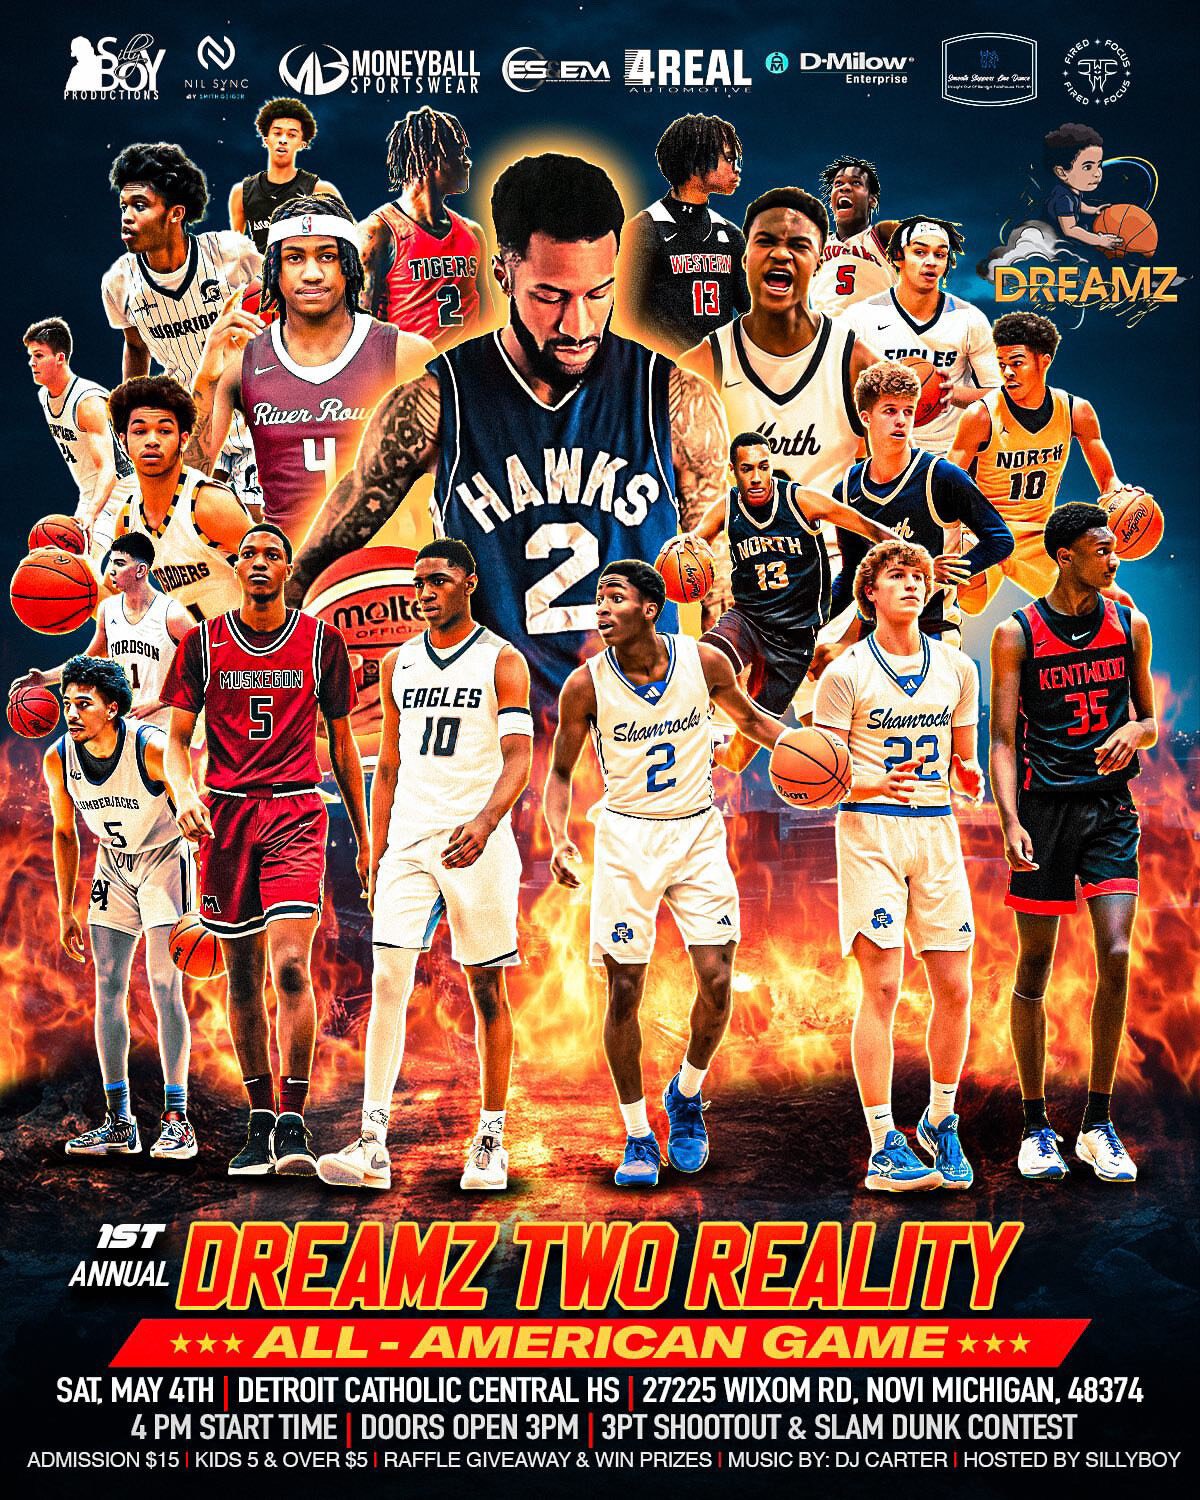 Promotional flier for Dreamz Two Reality's first All-American basketball game.